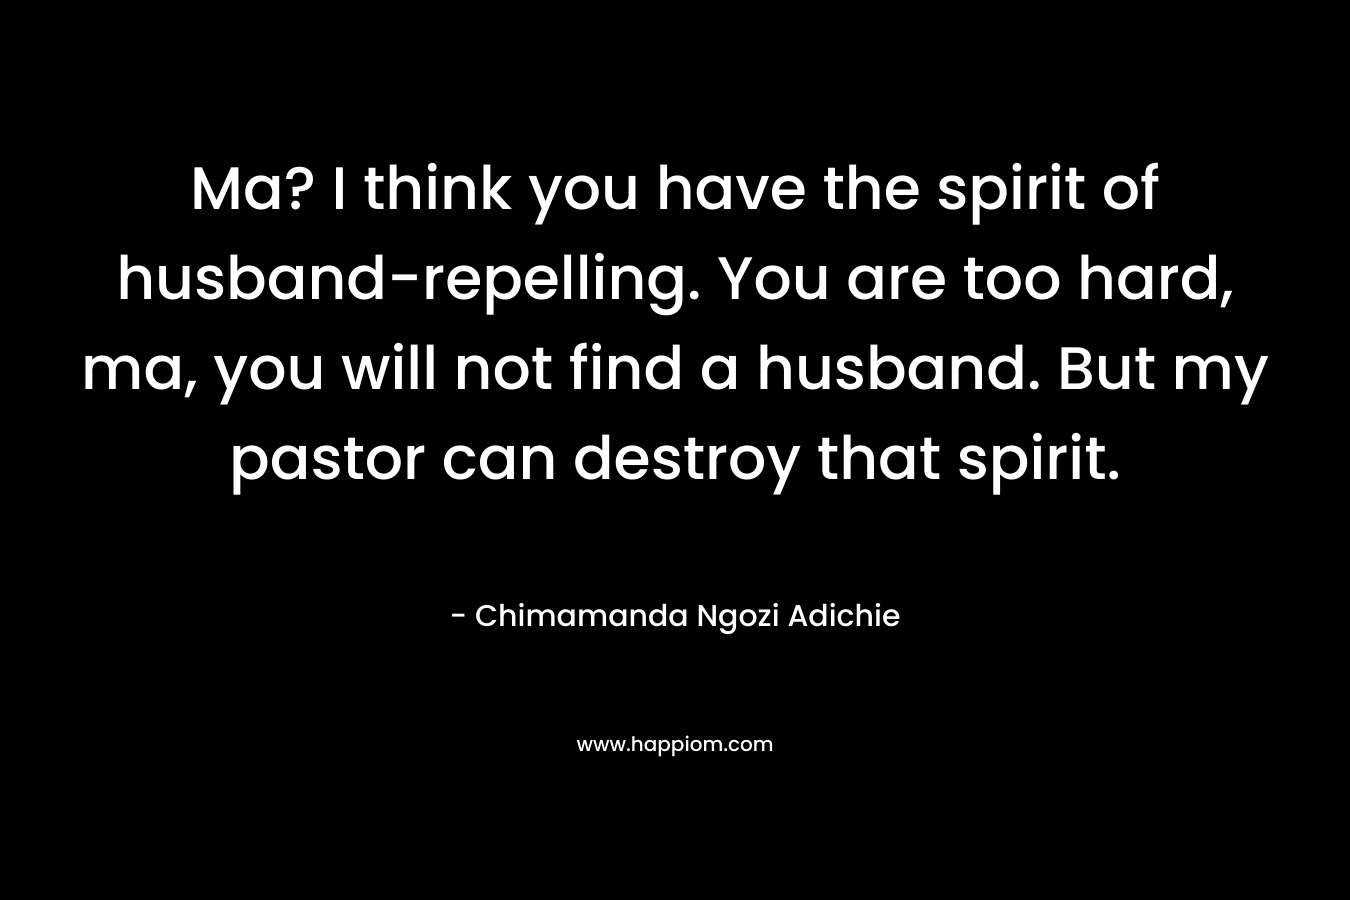 Ma? I think you have the spirit of husband-repelling. You are too hard, ma, you will not find a husband. But my pastor can destroy that spirit.